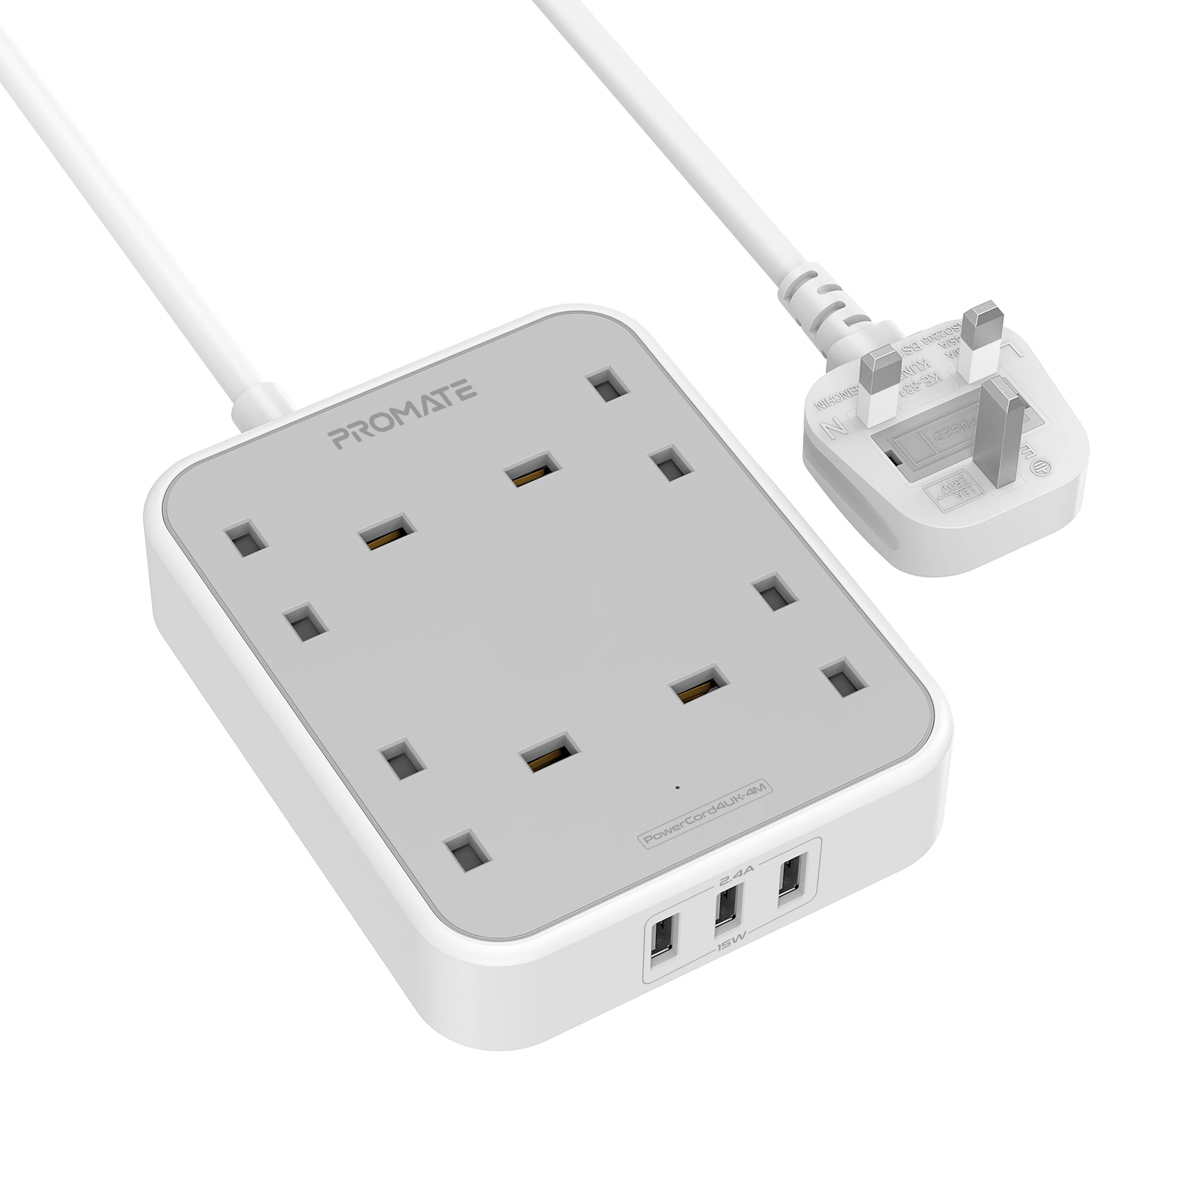 Promate Power Strip, Powerful 7-in-1 Wall Charger with 3250W 4 AC Outlets, 3 USB Intellicharge Ports, Over-Charge Protection and 4M Extension Cord for iPhone 12/Home/Office/iPad, PowerCord4UK-4M